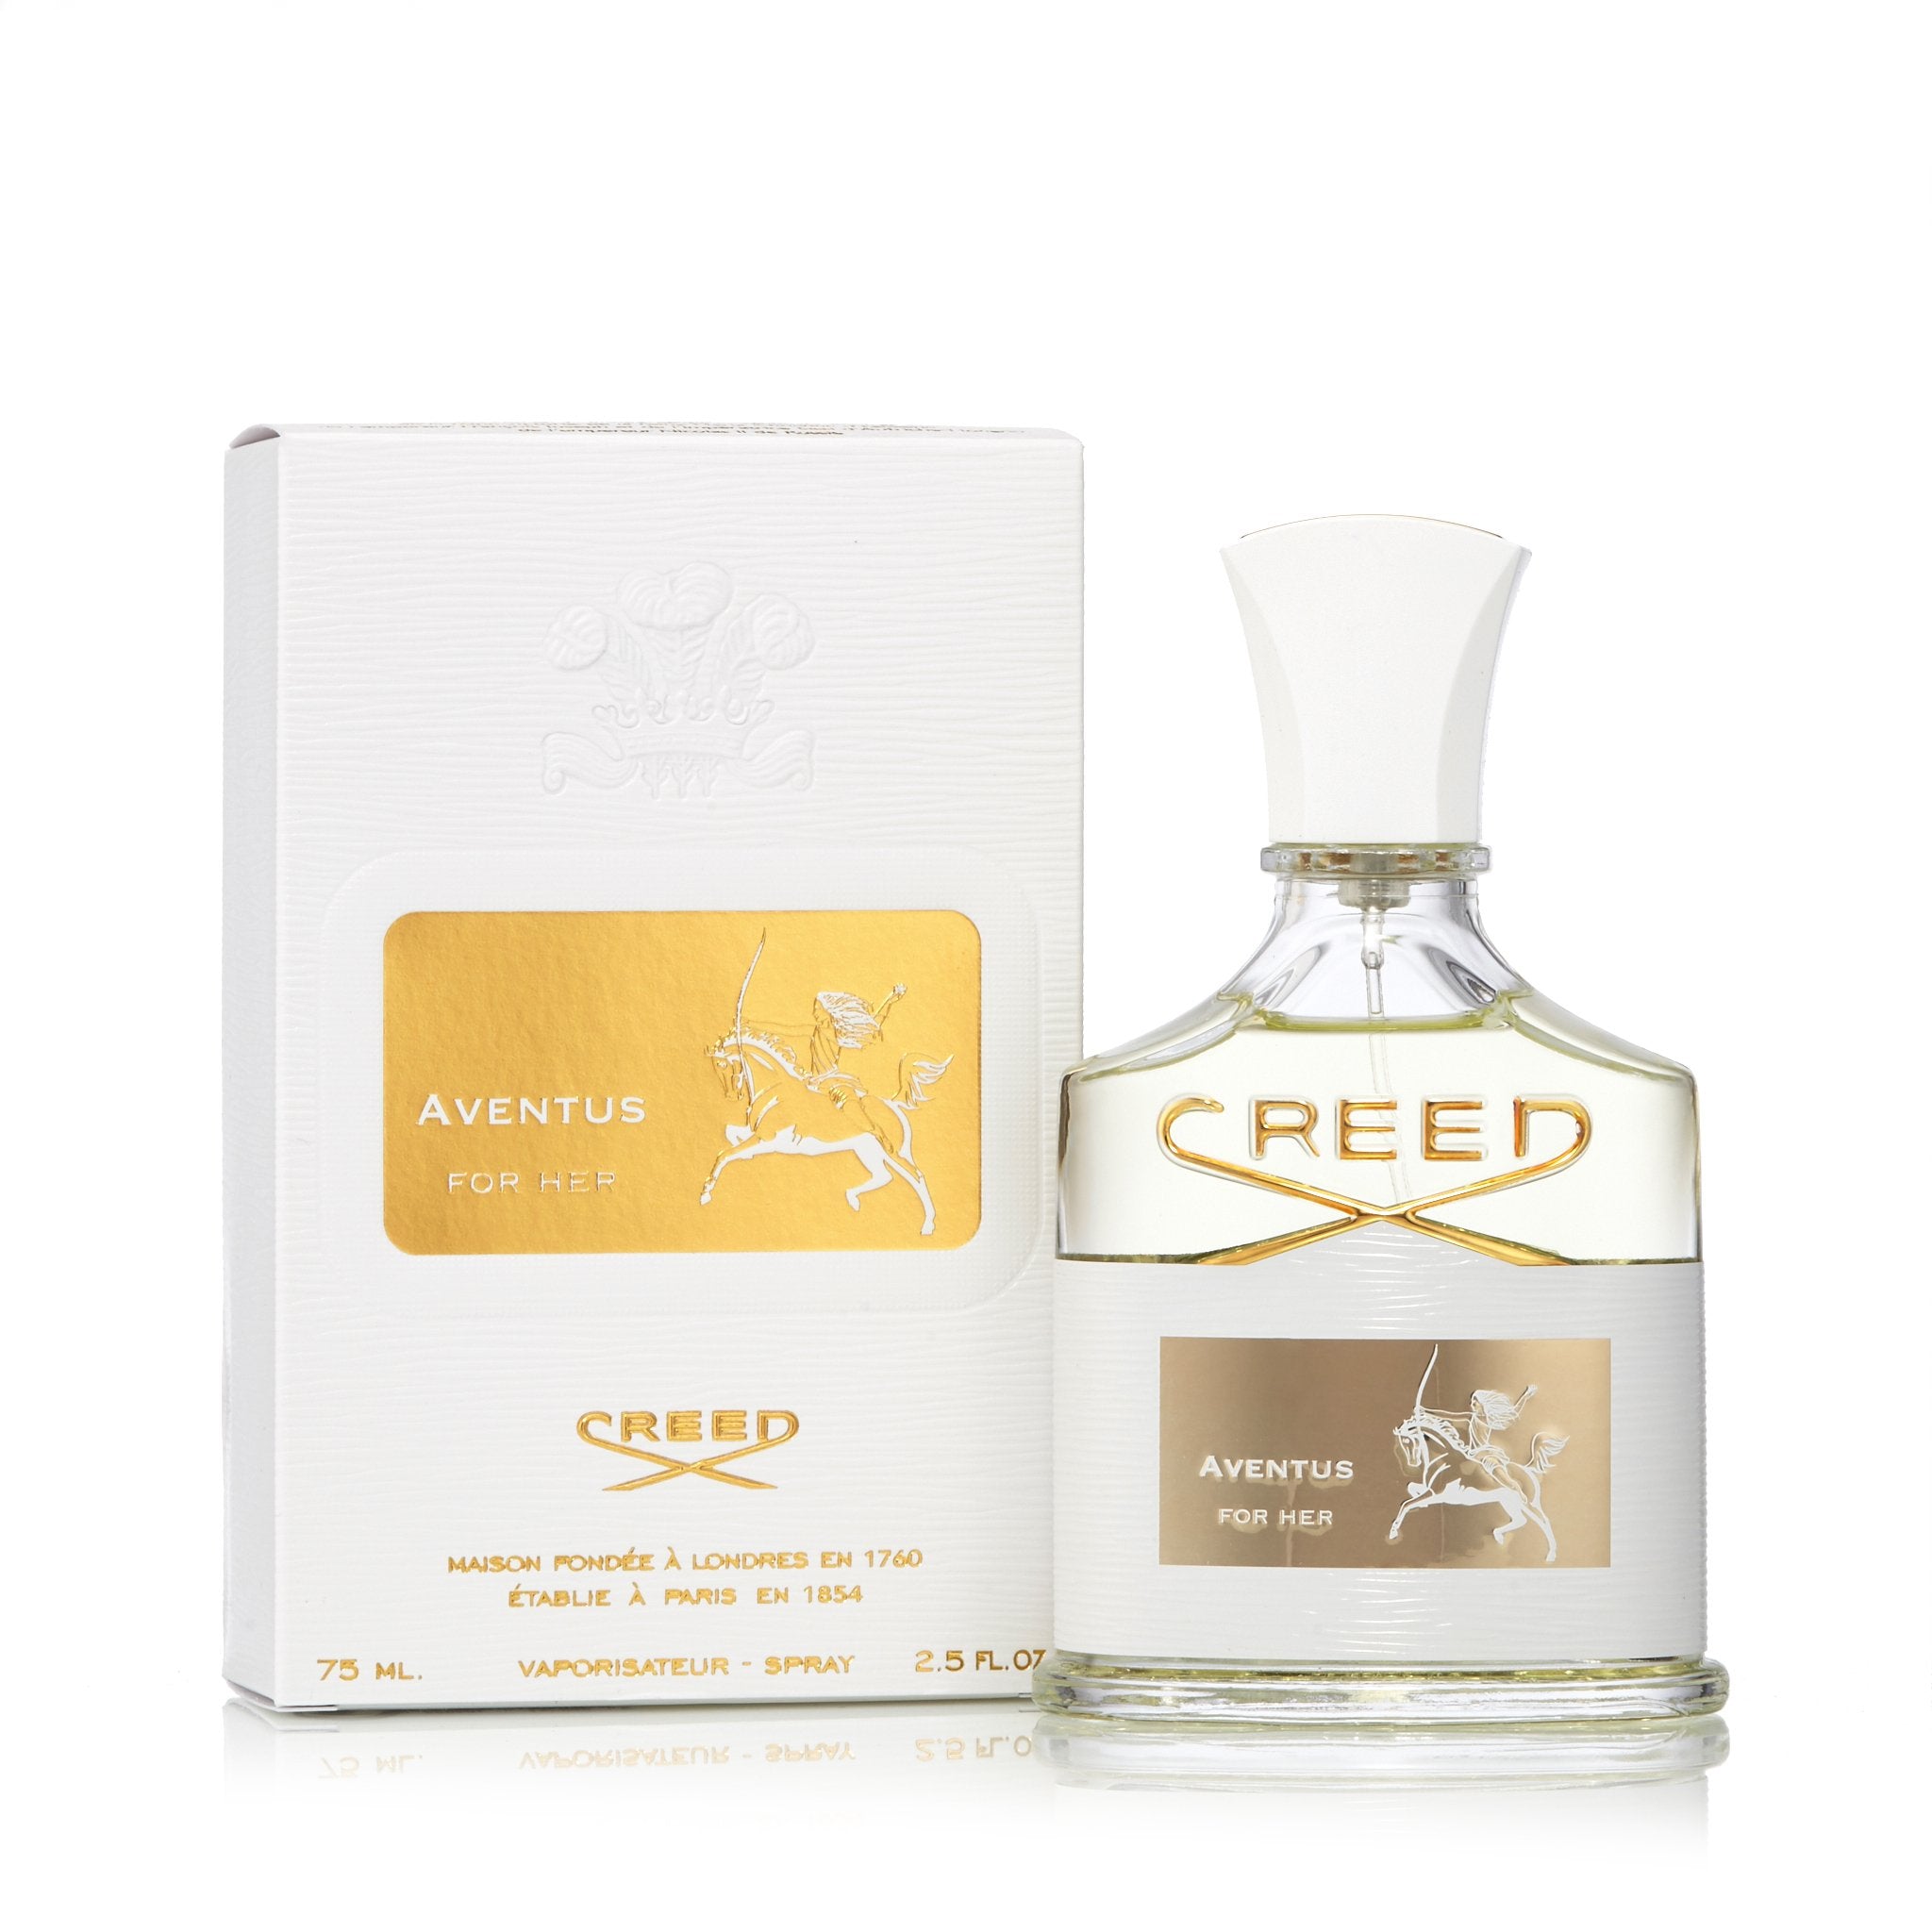 Aventus for Her Eau de Creed Parfum Spray Fragrance for Outlet by Women –